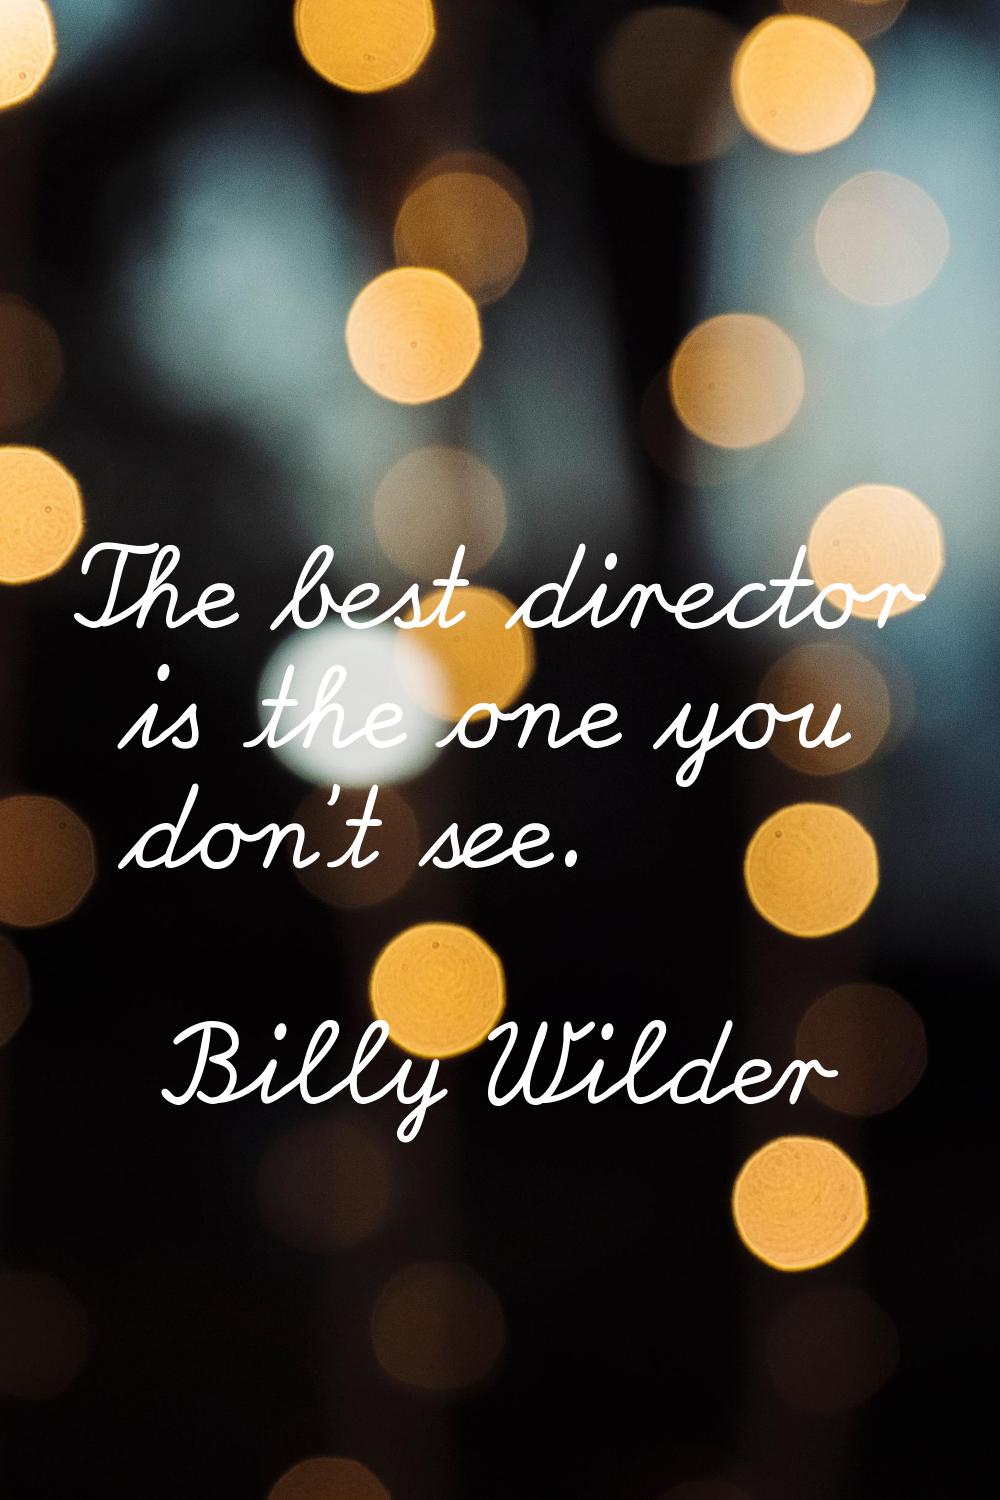 The best director is the one you don't see.